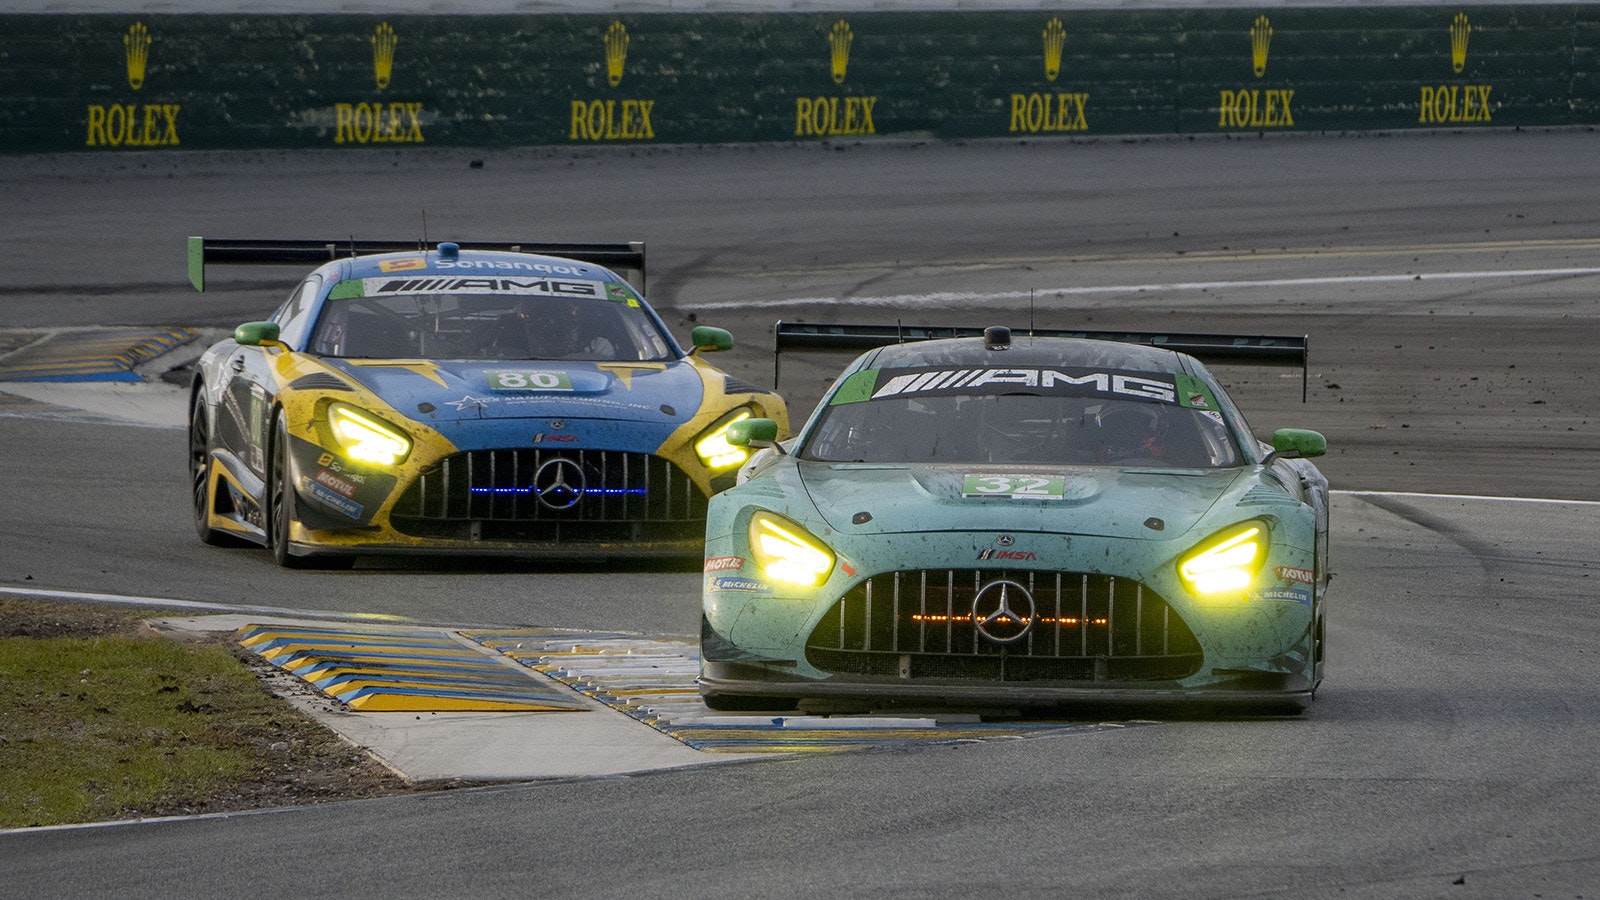 Team Korthoff, the only professional auto racing team based in Wyoming, won the IMSA Michelin Endurance Cup last year in only its second season of racing with its green No. 32 Mercedes AMG GT3 EVO.